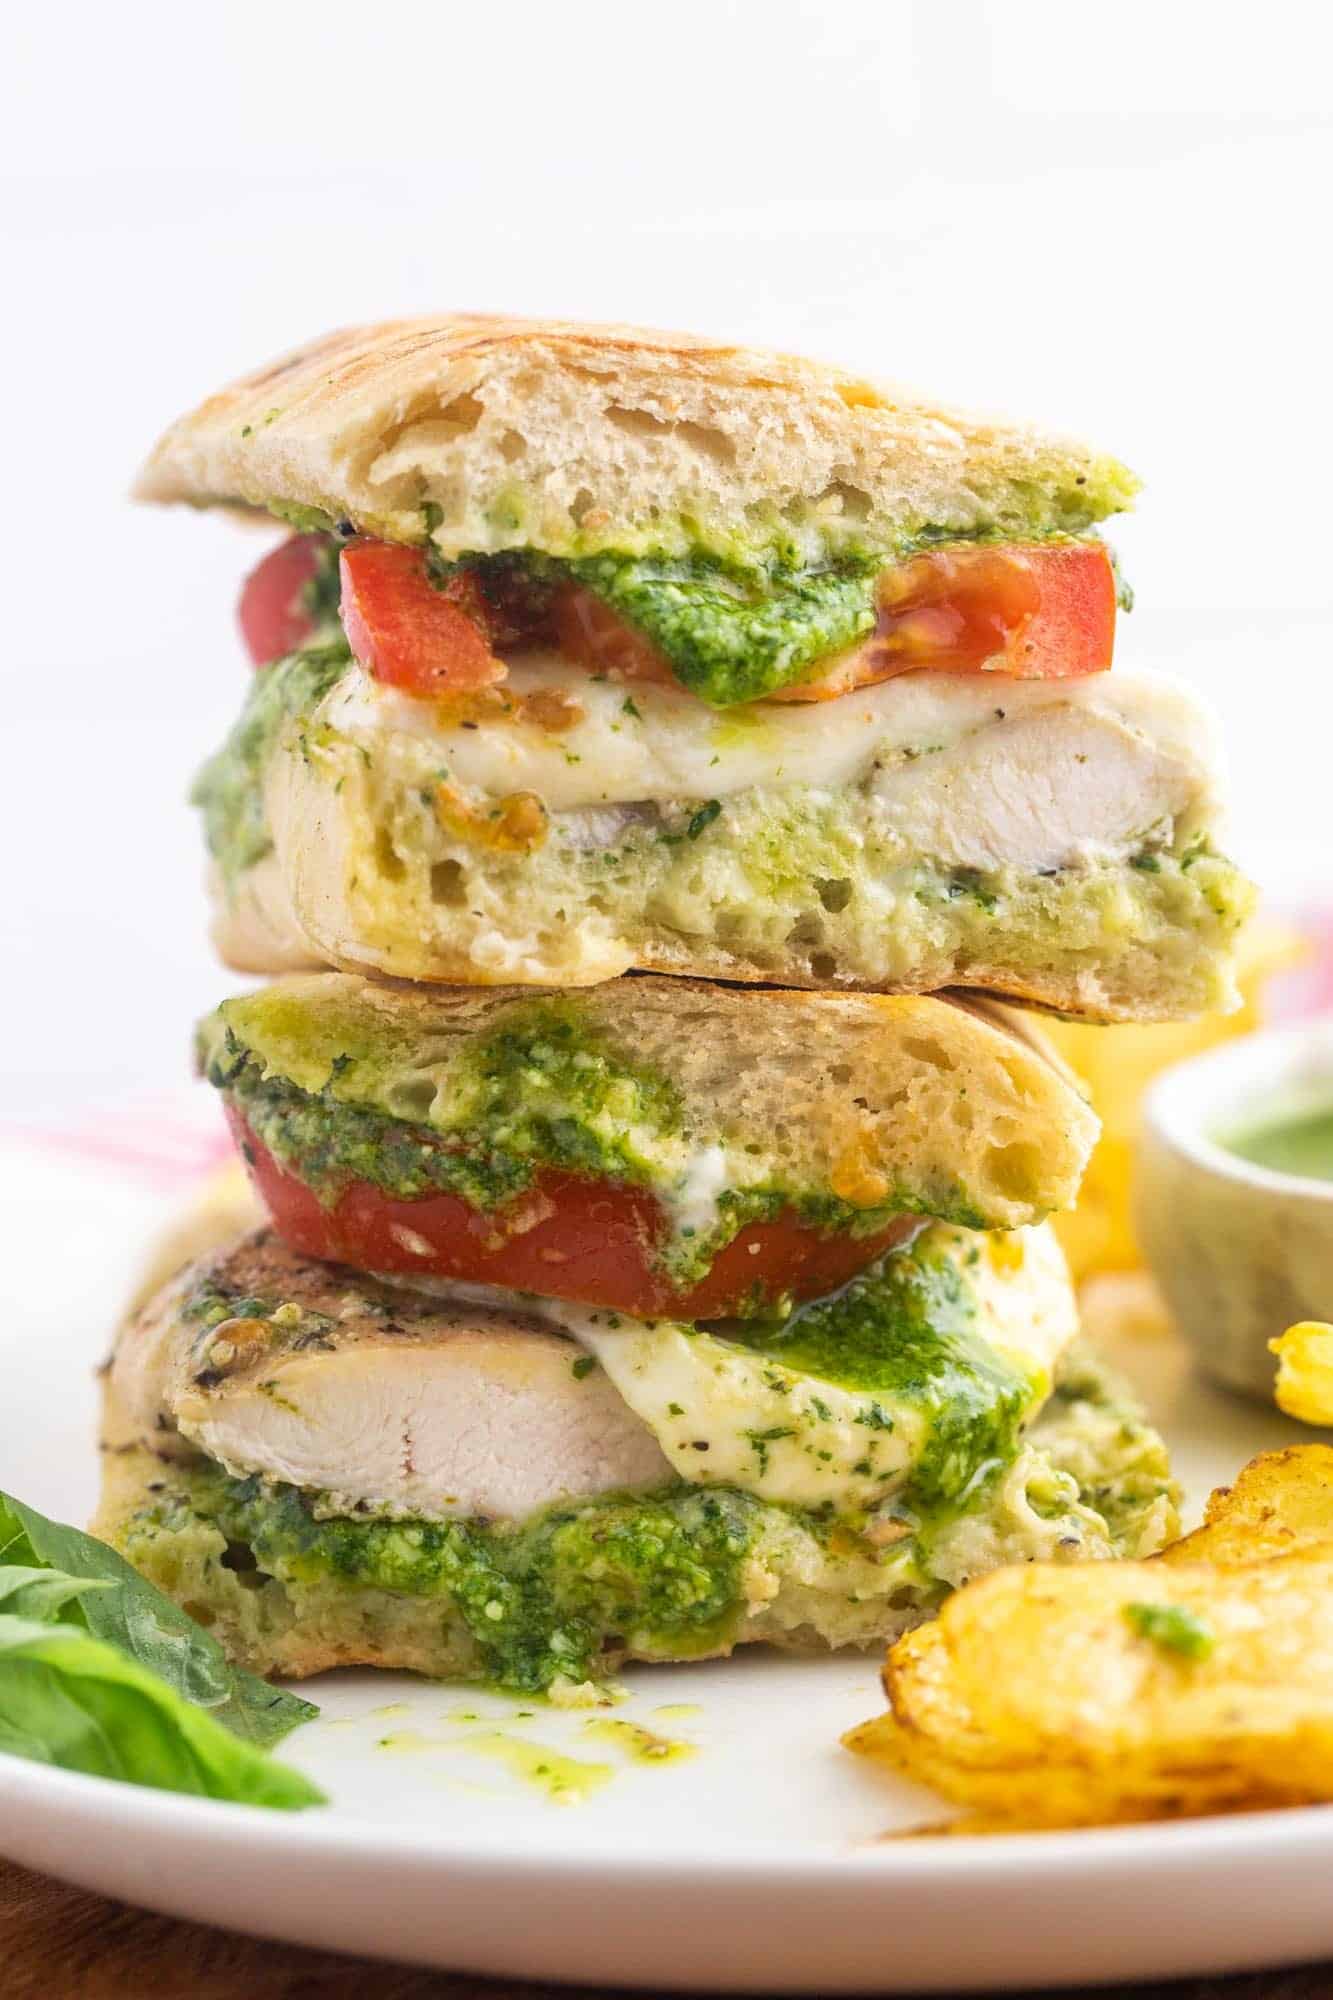 a chicken sandwich on ciabatta bread cut in half and stacked on a plate.